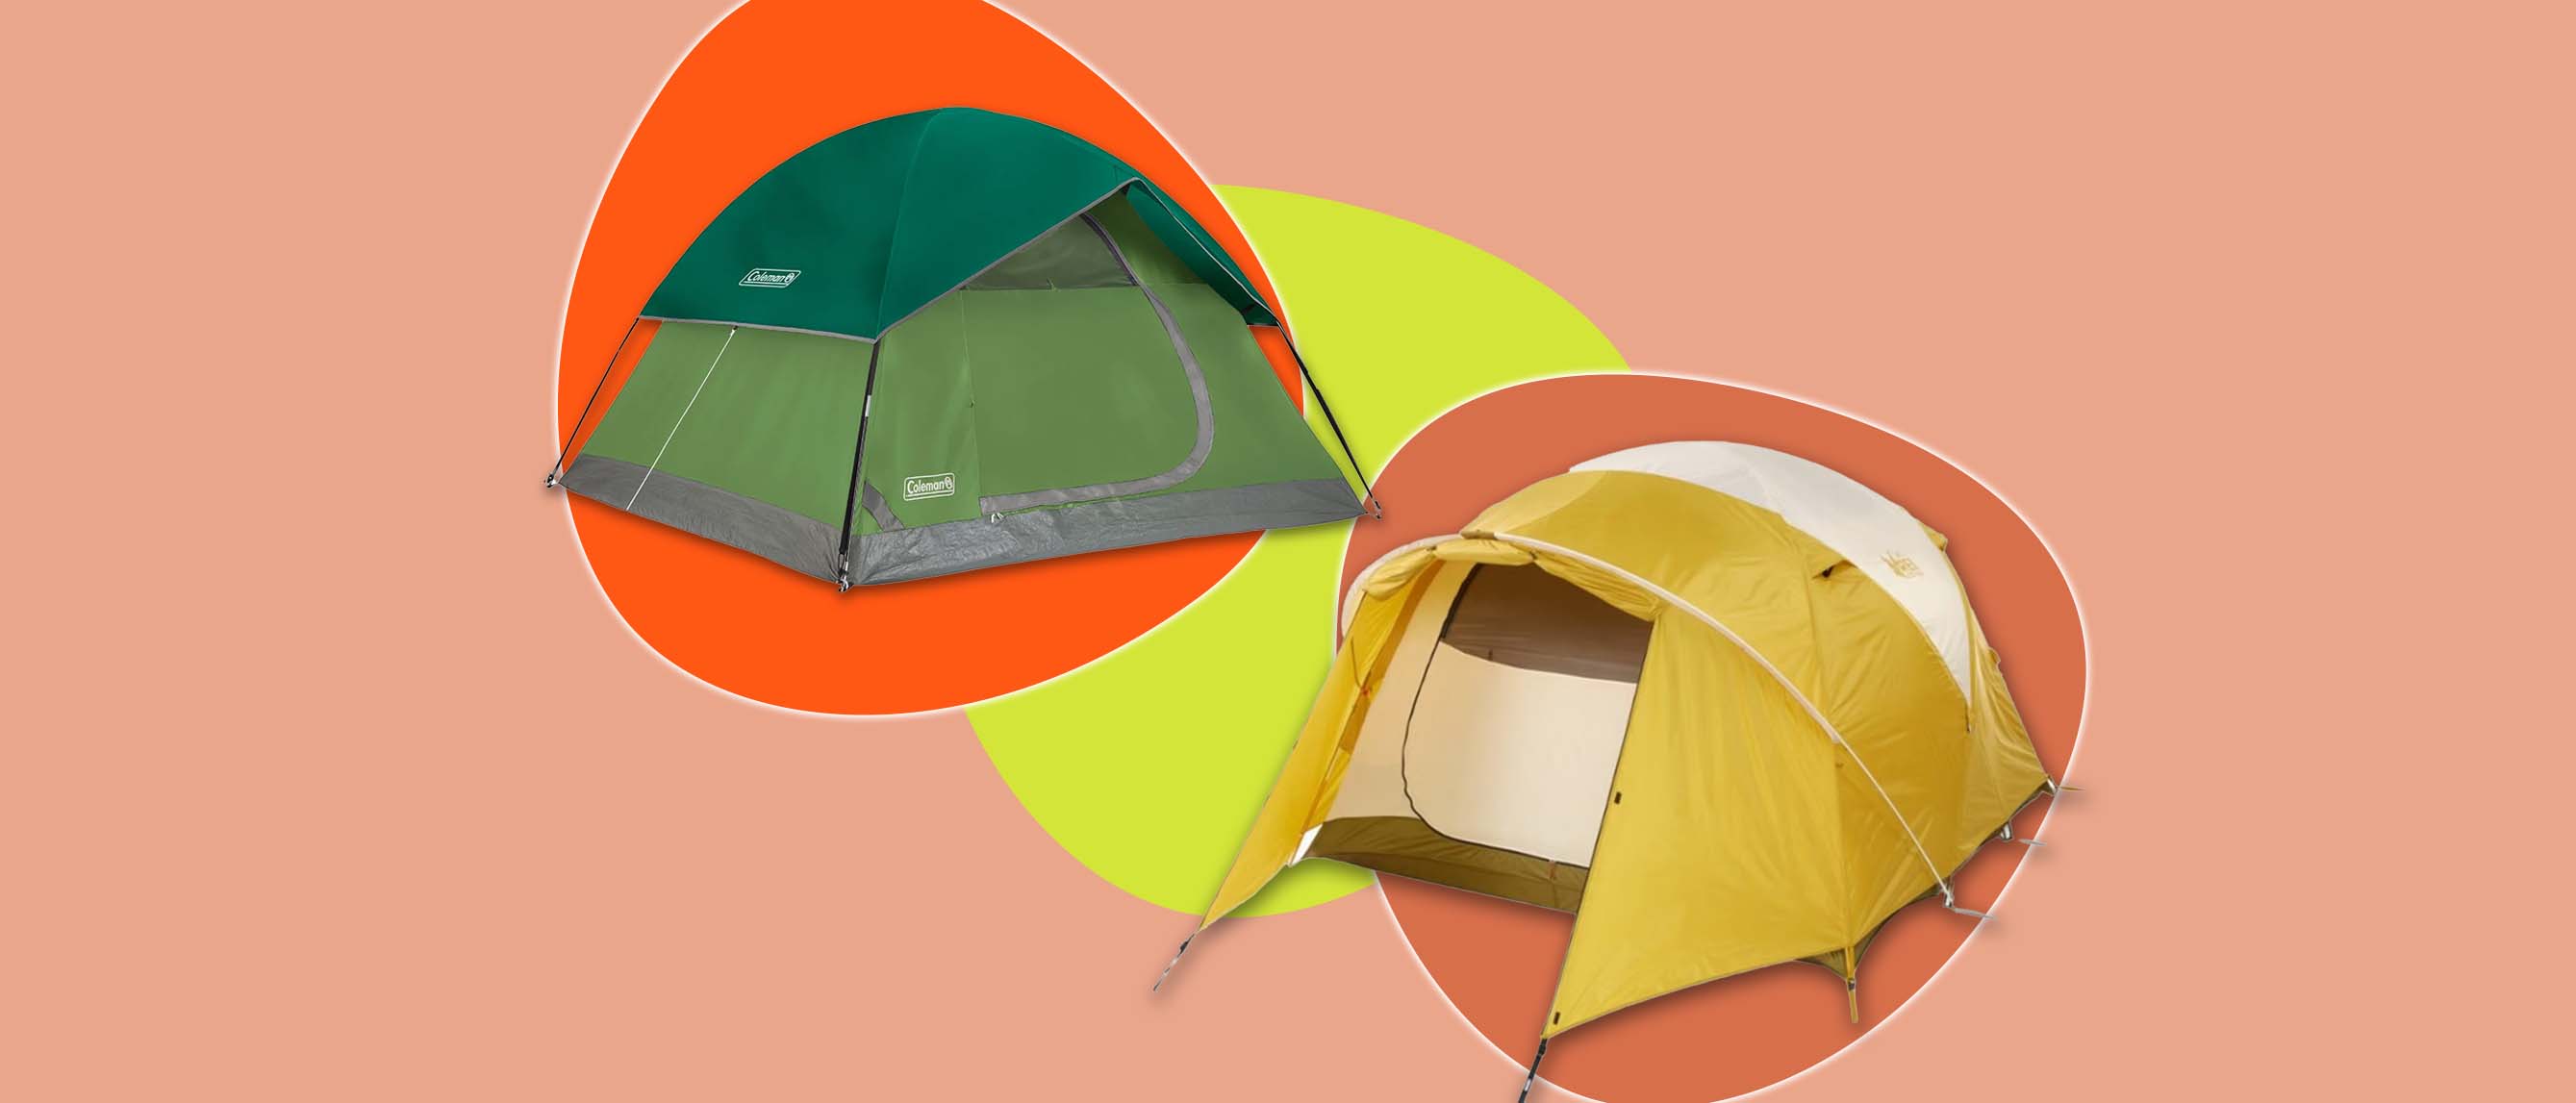 Image of two tents